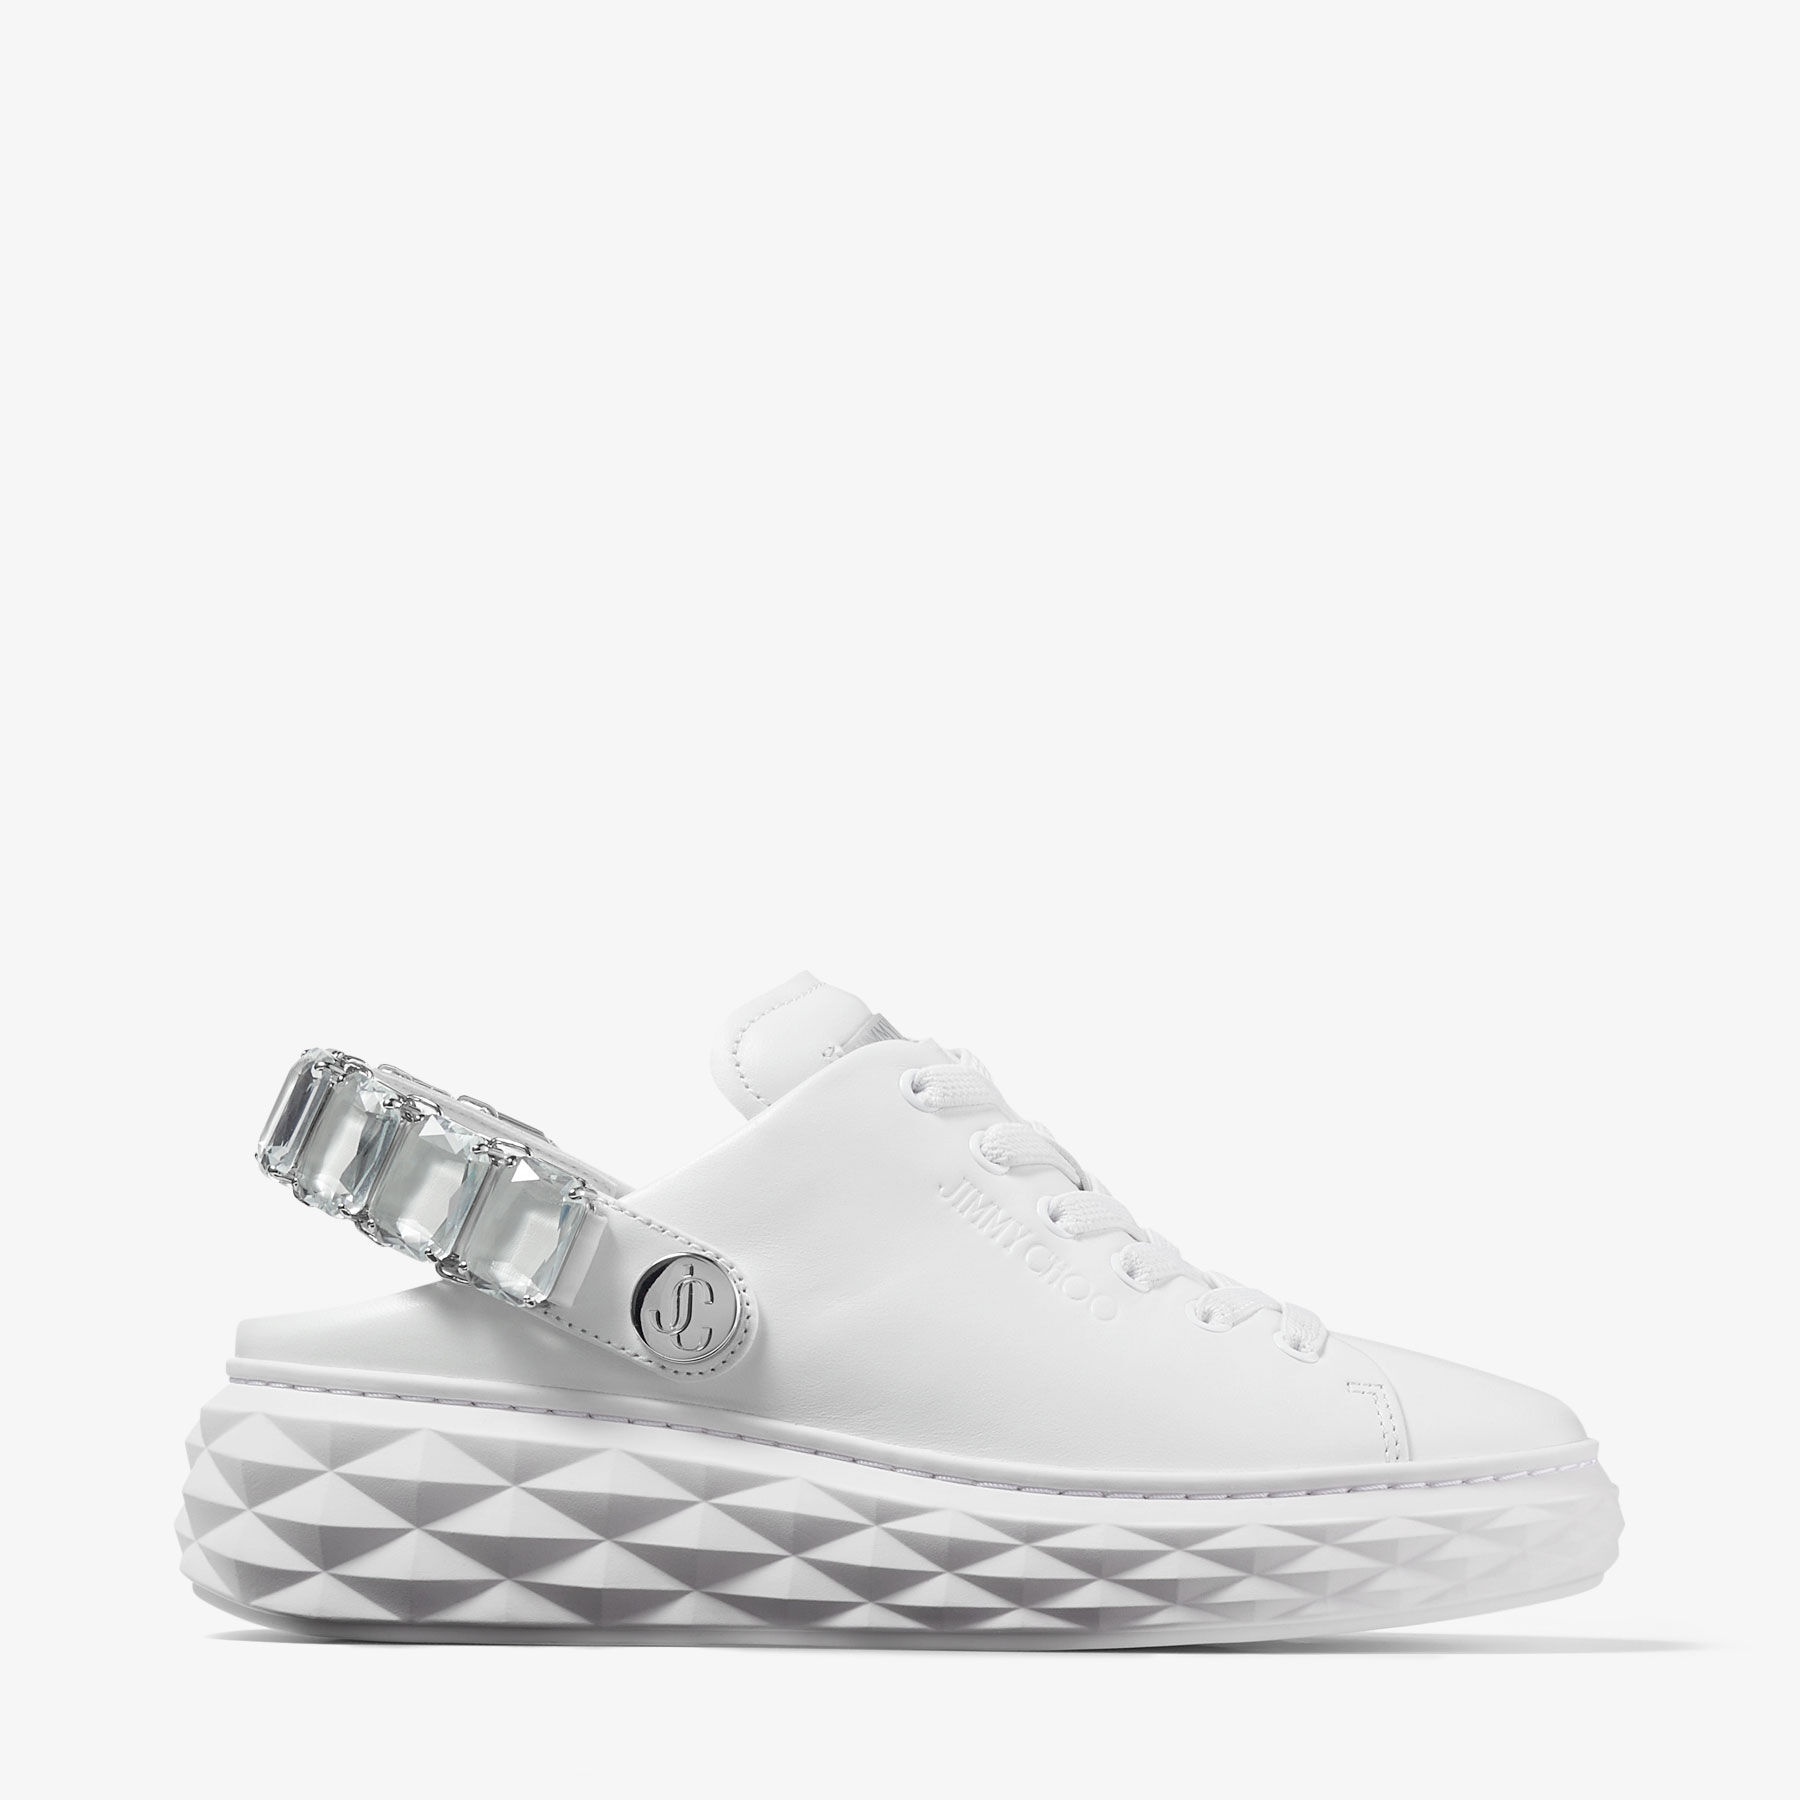 Diamond Maxi Crystal
White Nappa Leather Slipper Trainers with Crystal Strap - 1